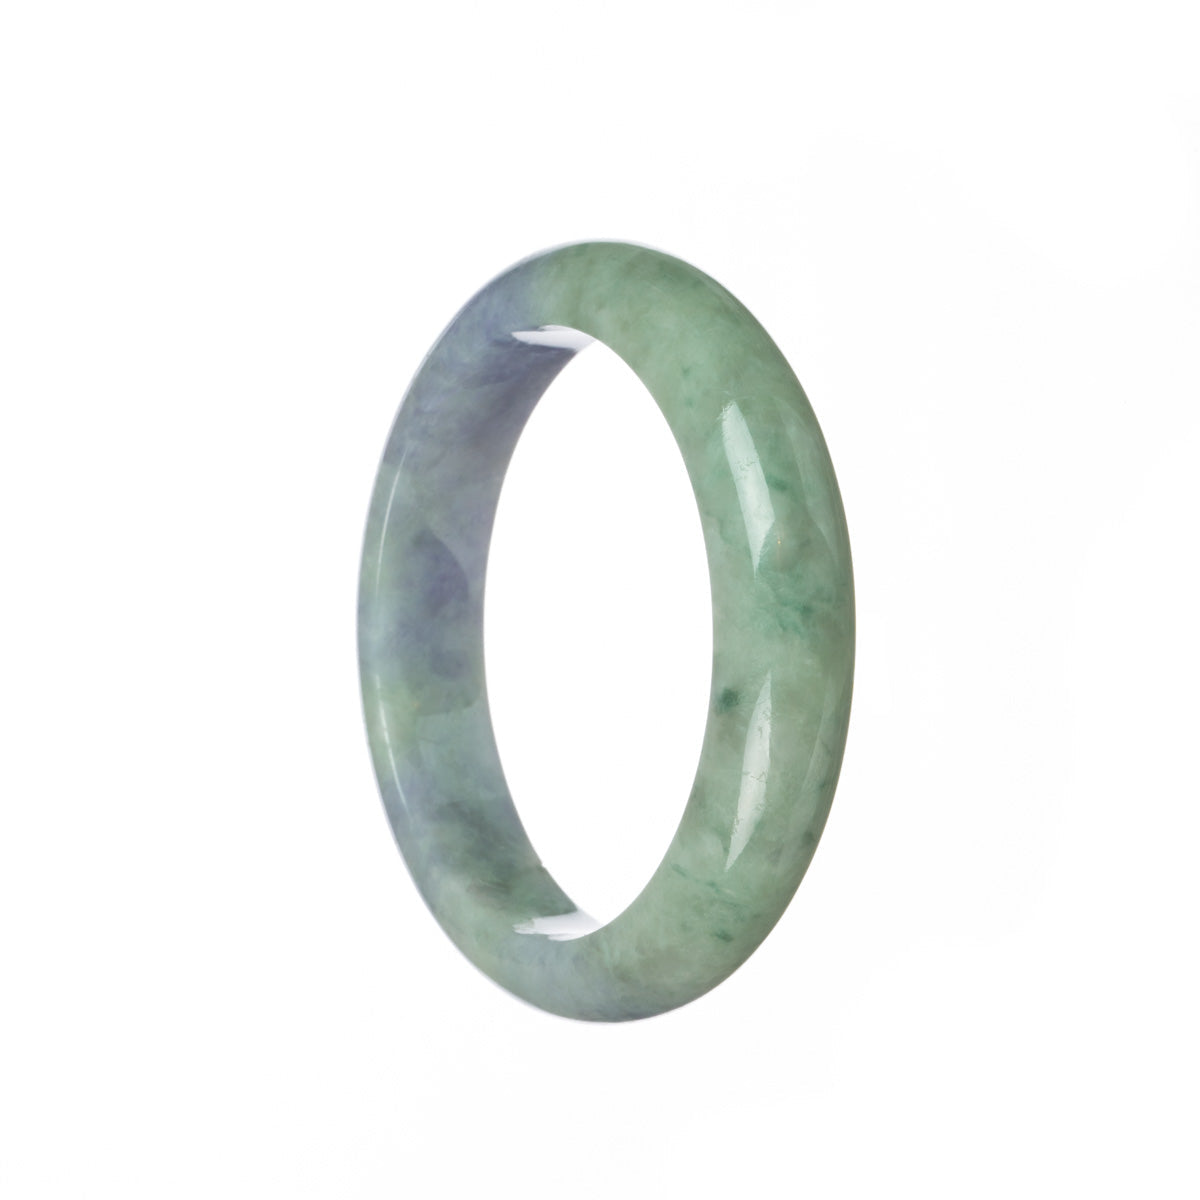 A lavender and green Burma jade bracelet in a half-moon shape, made with genuine Grade A stones.